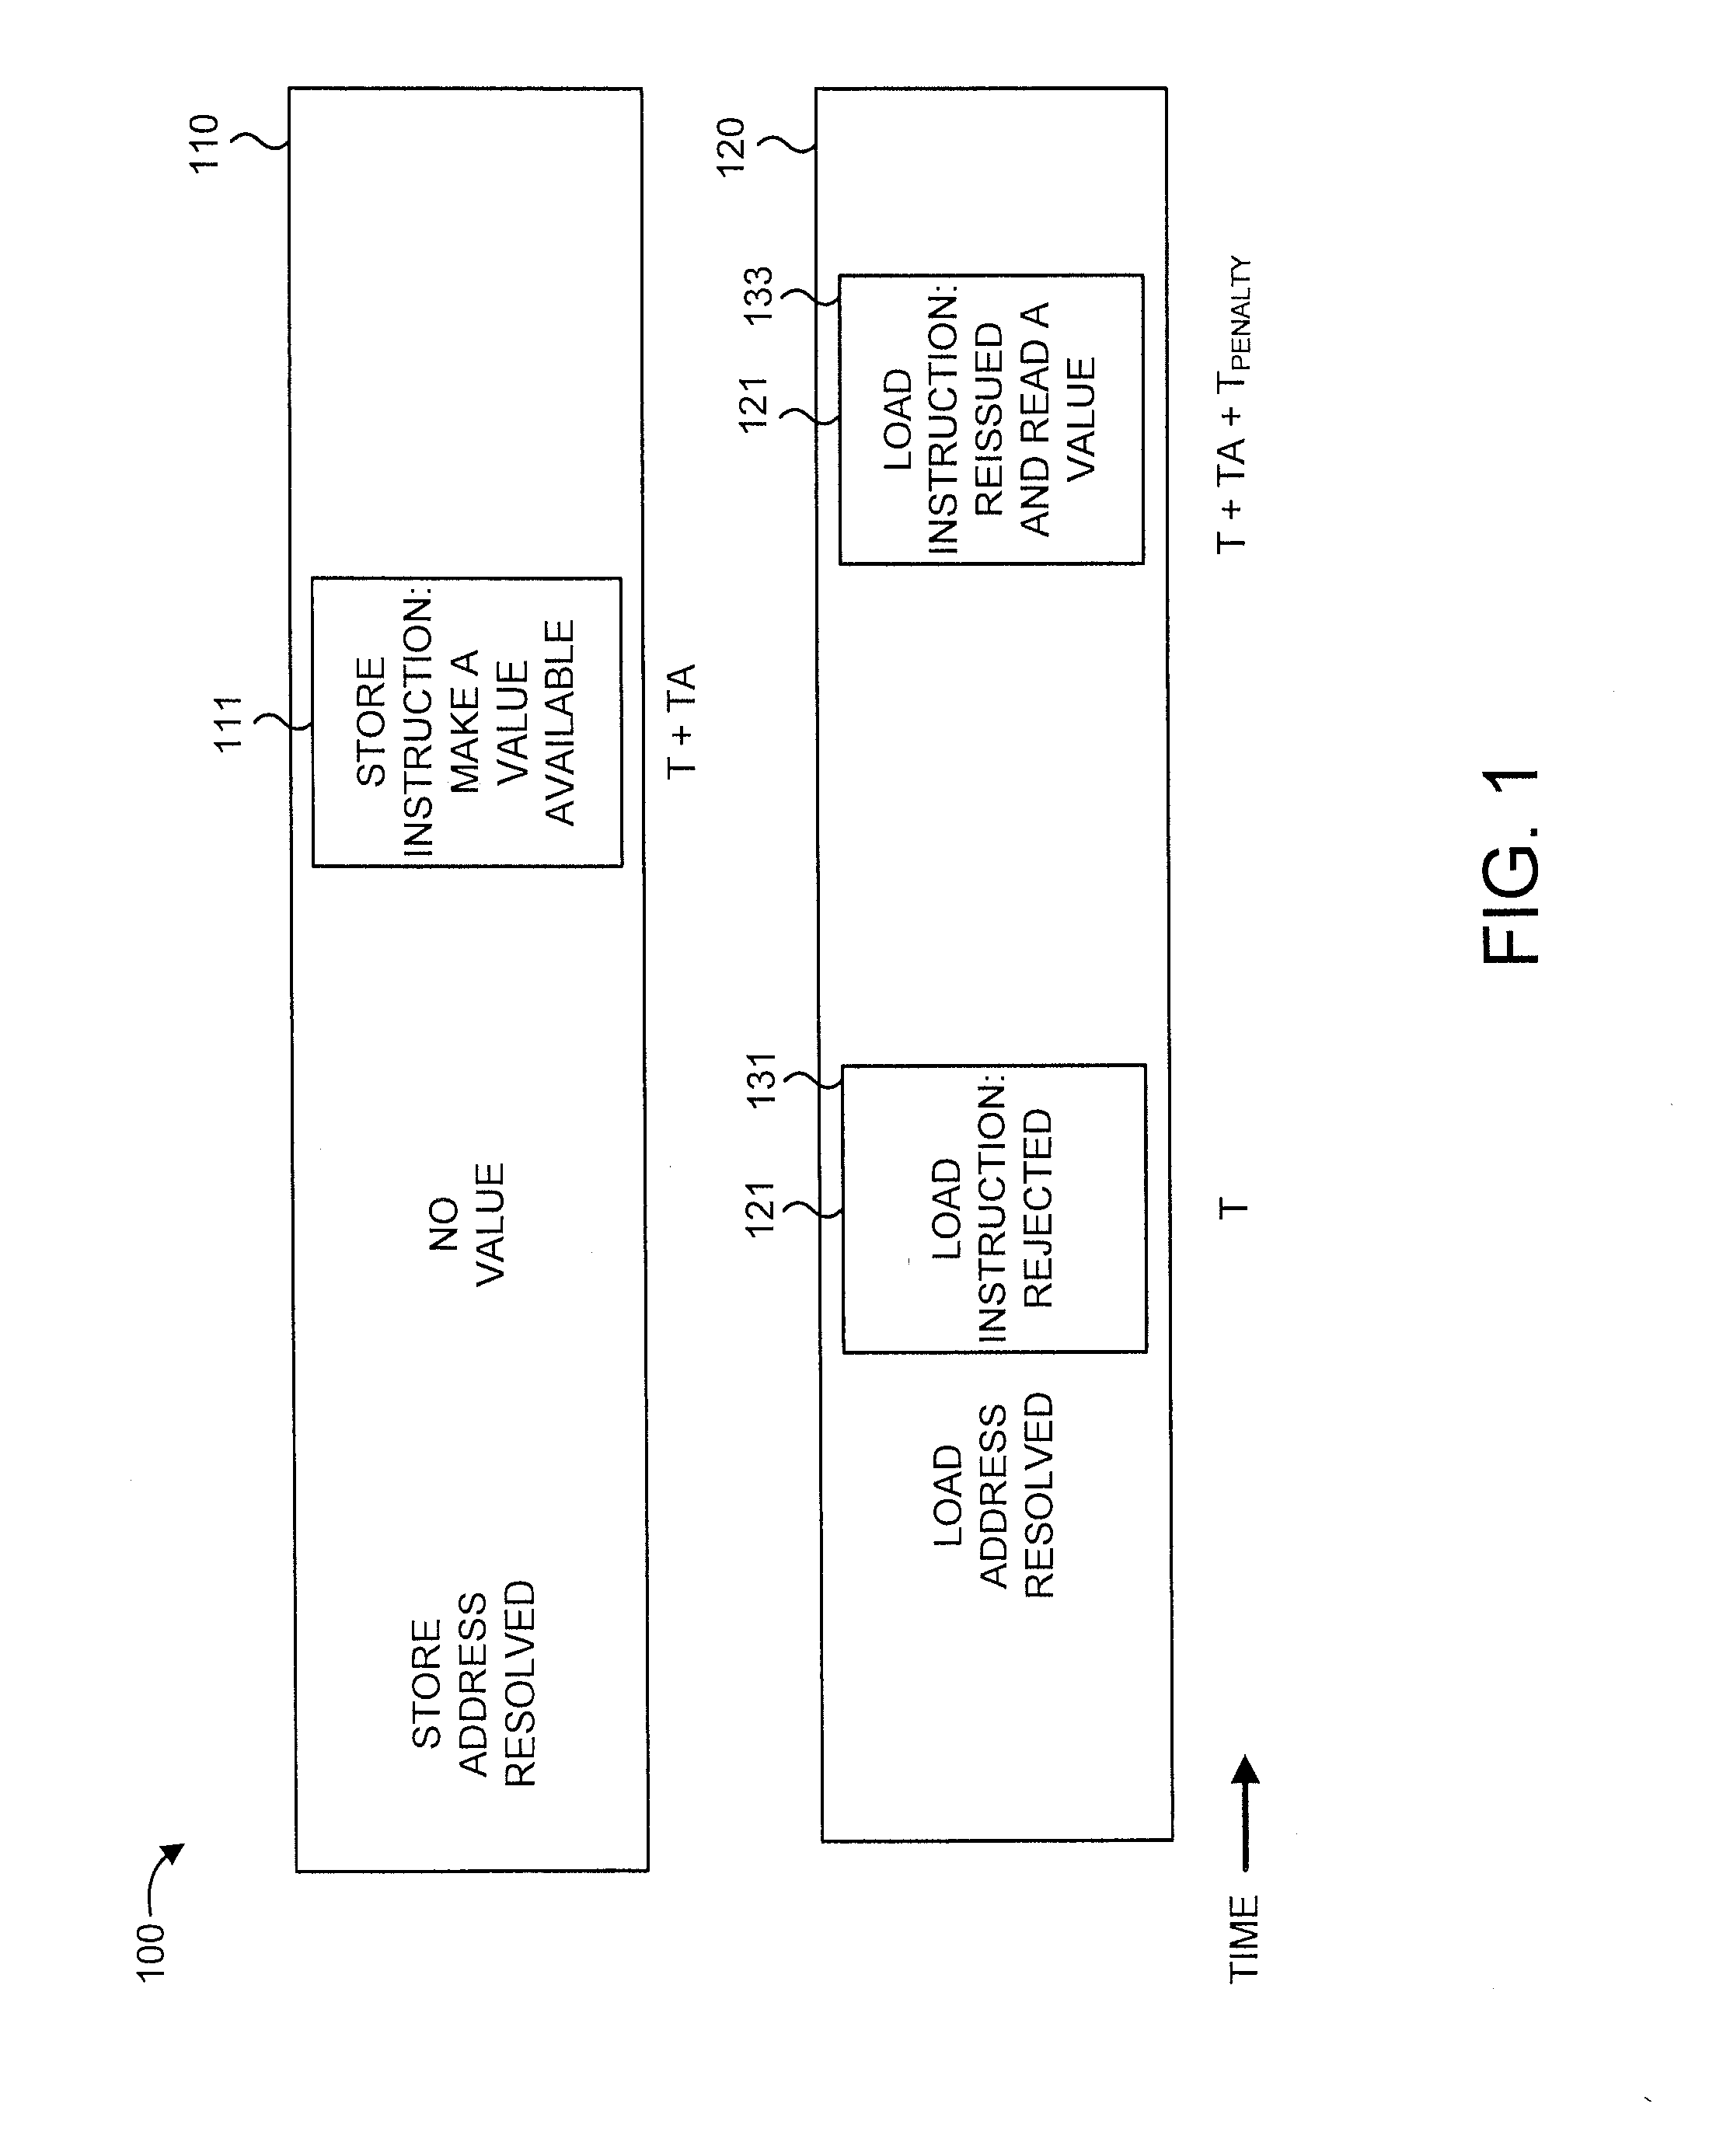 Simultaneous finish of stores and dependent loads